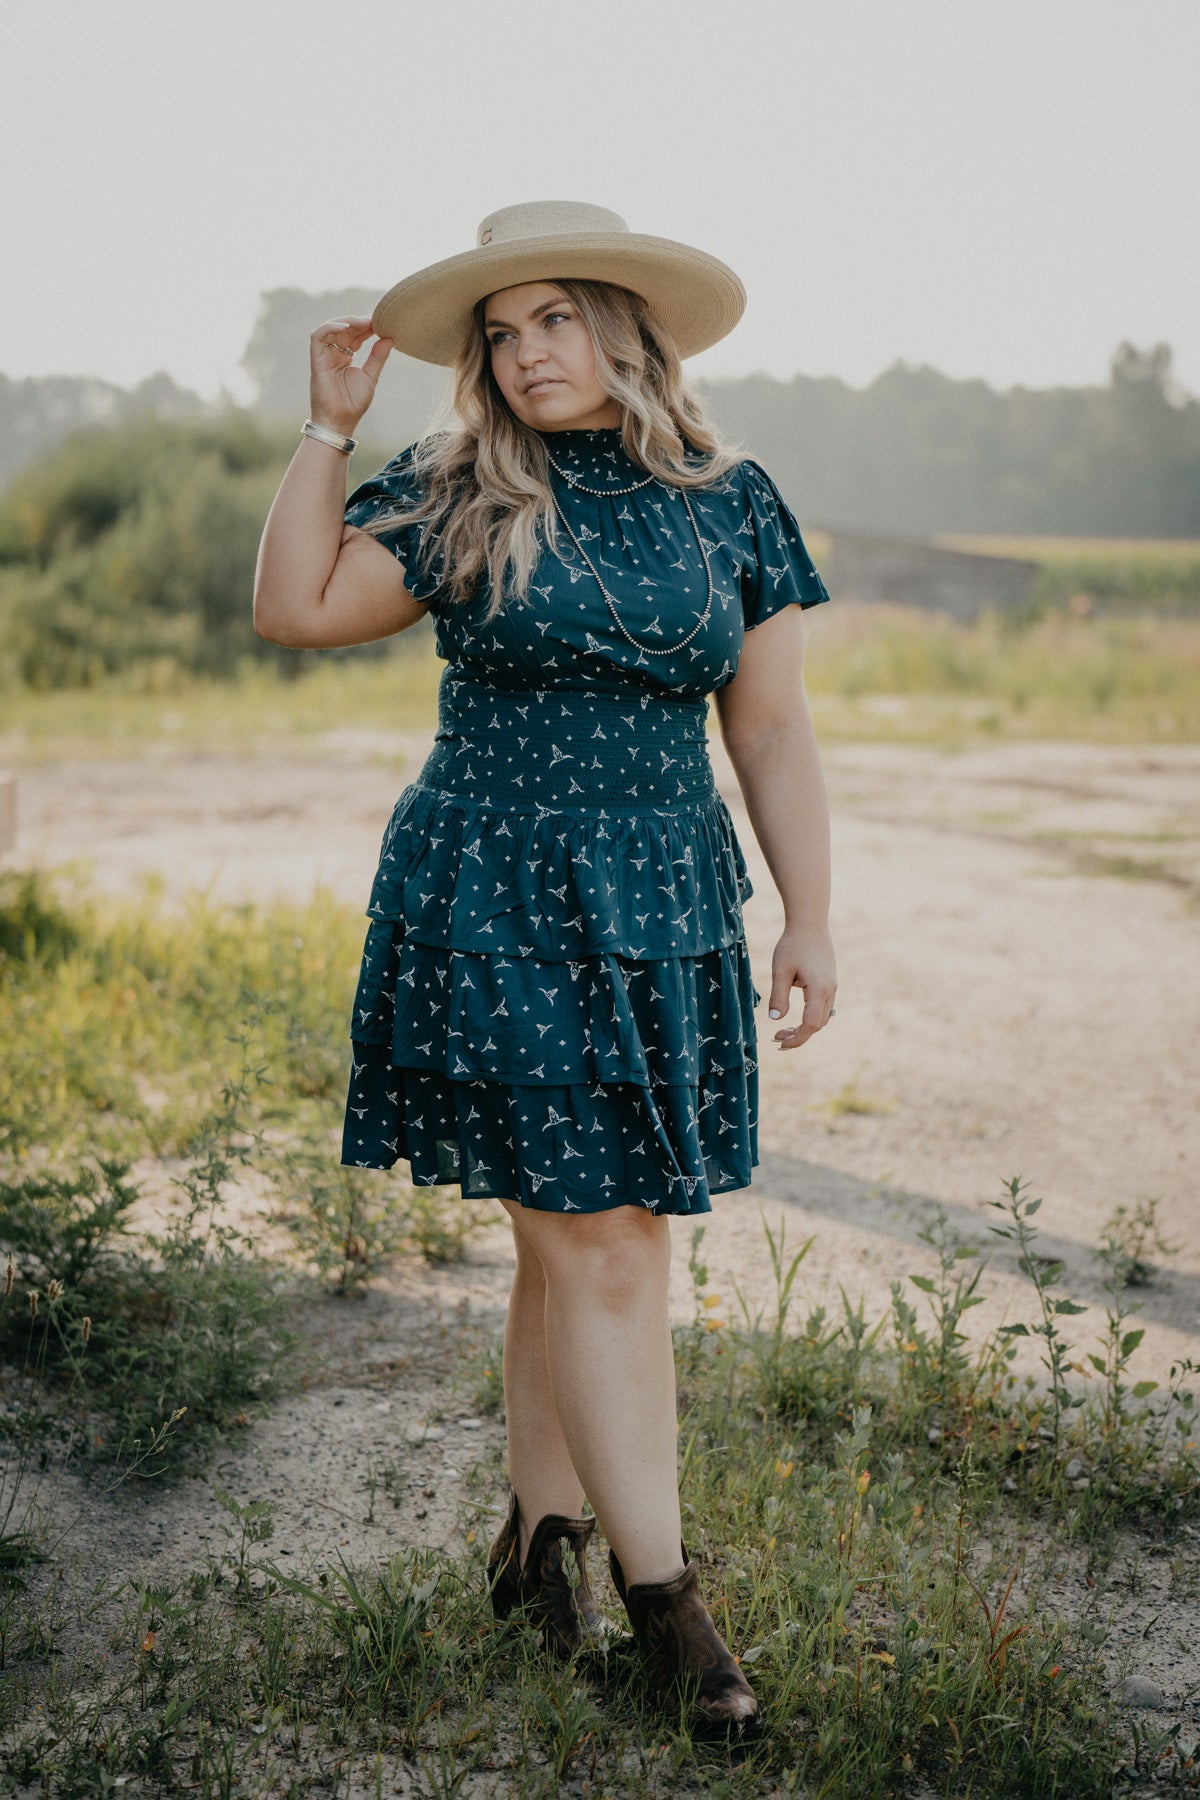 'Steer Me' Tiered Dress by Ariat (Sizes 2 - 12)